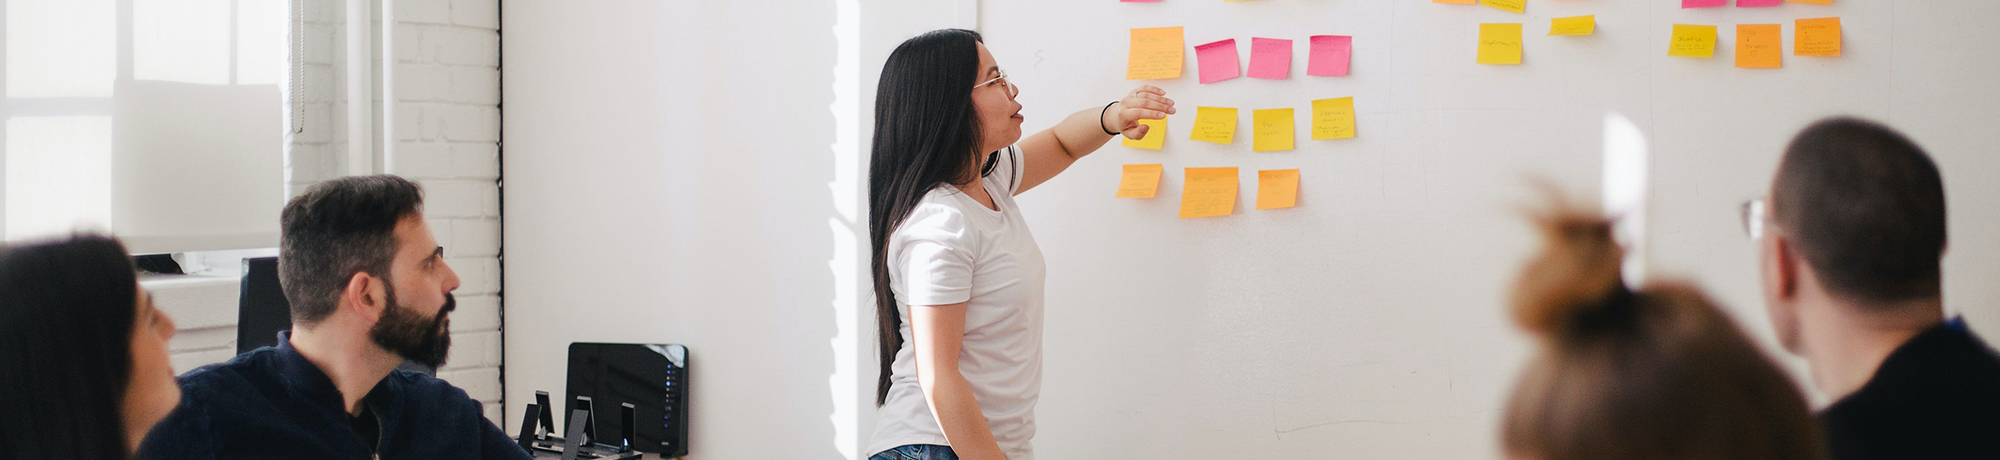 woman putting sticky notes on a white board